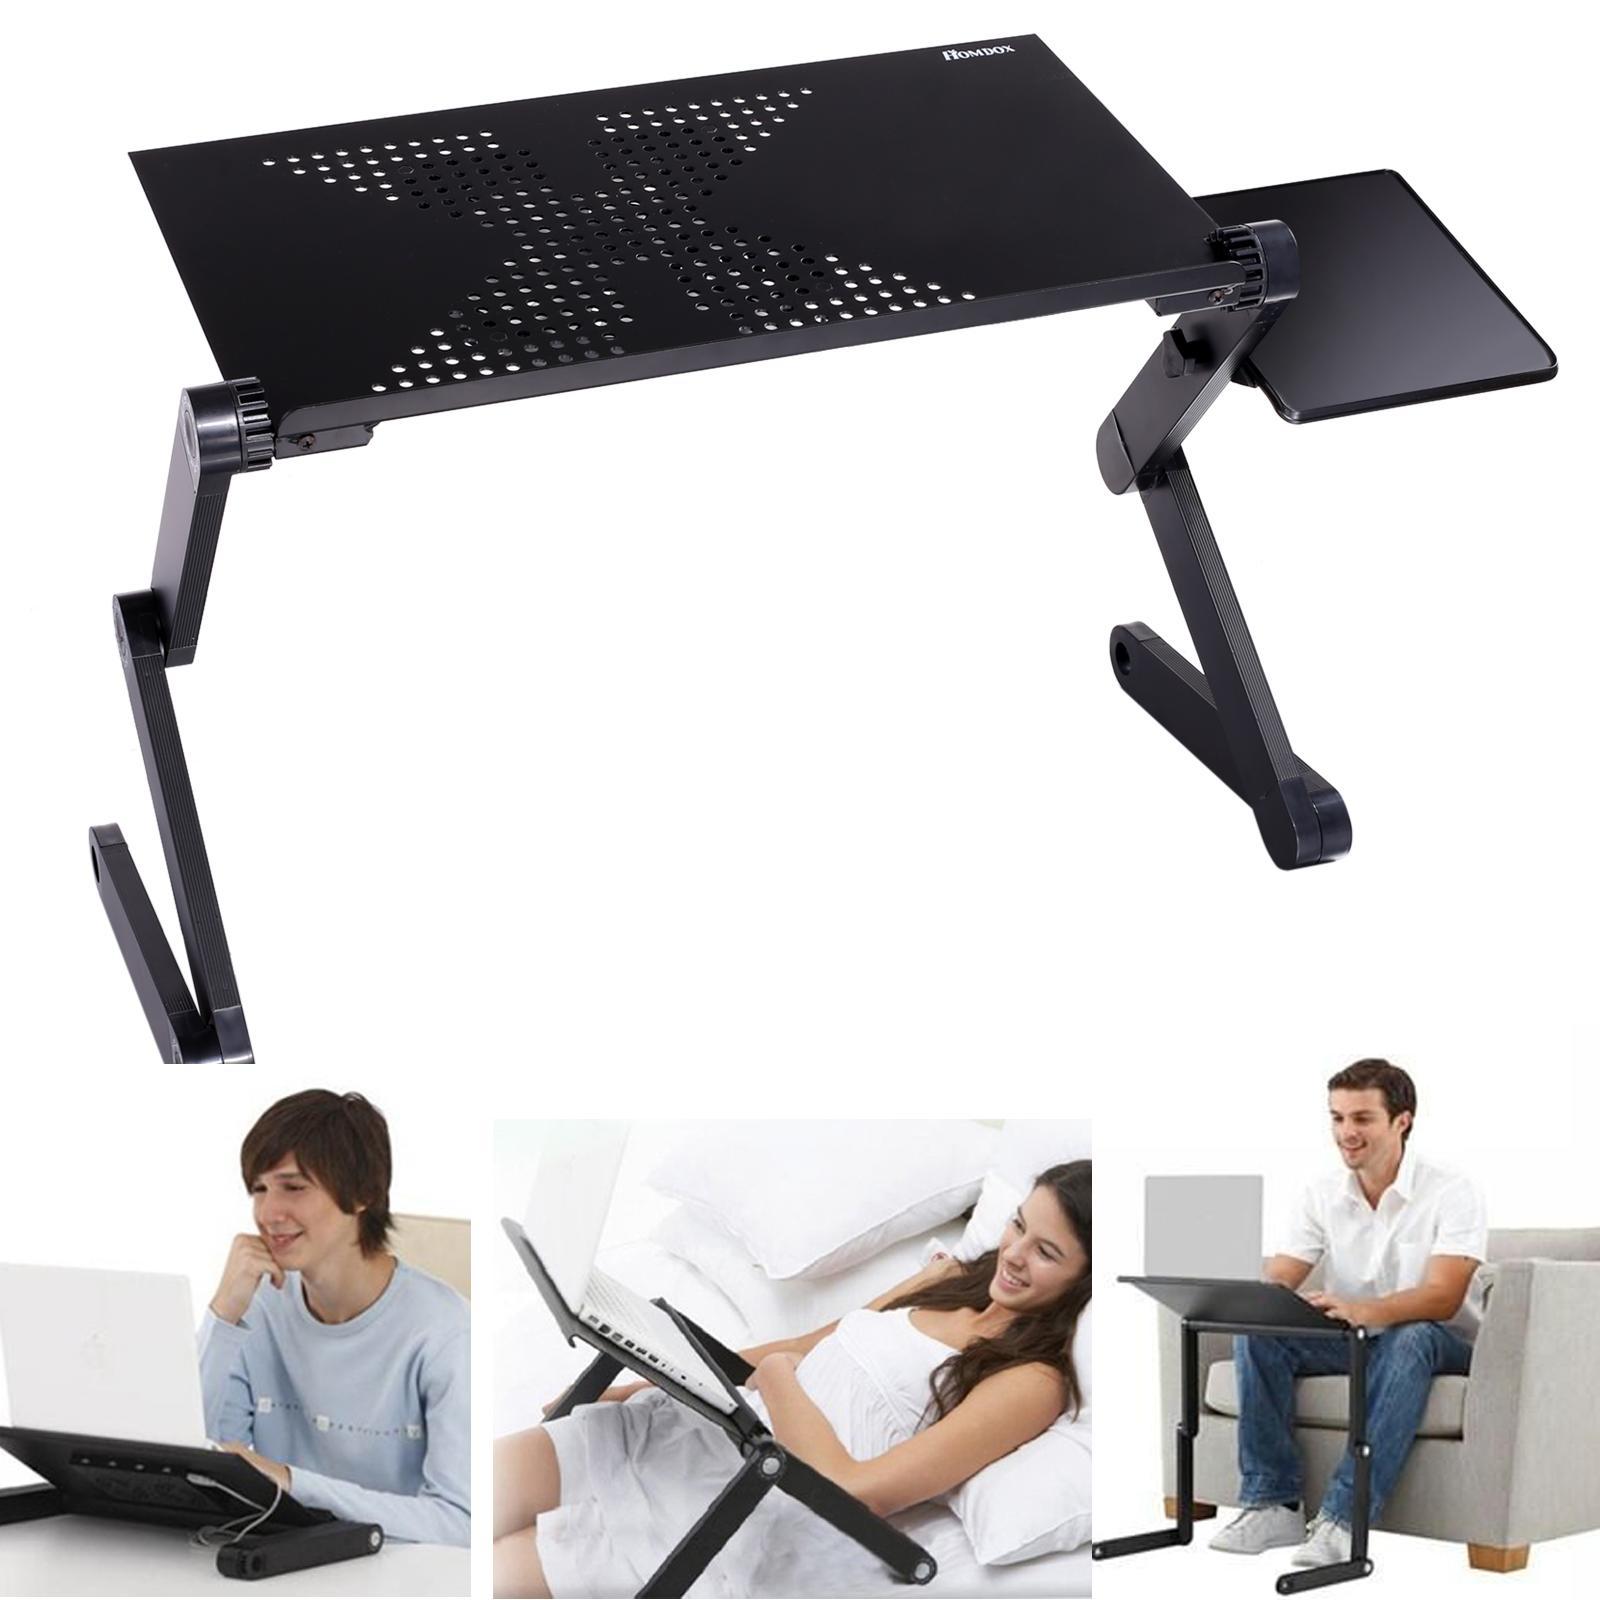 Portable Laptop Table Stand with Mouse Board Cooling Fan Pad Fully Adjustable-Light Weight Aluminum-Black Bed Tray Desk Book HPPY - image 1 of 8